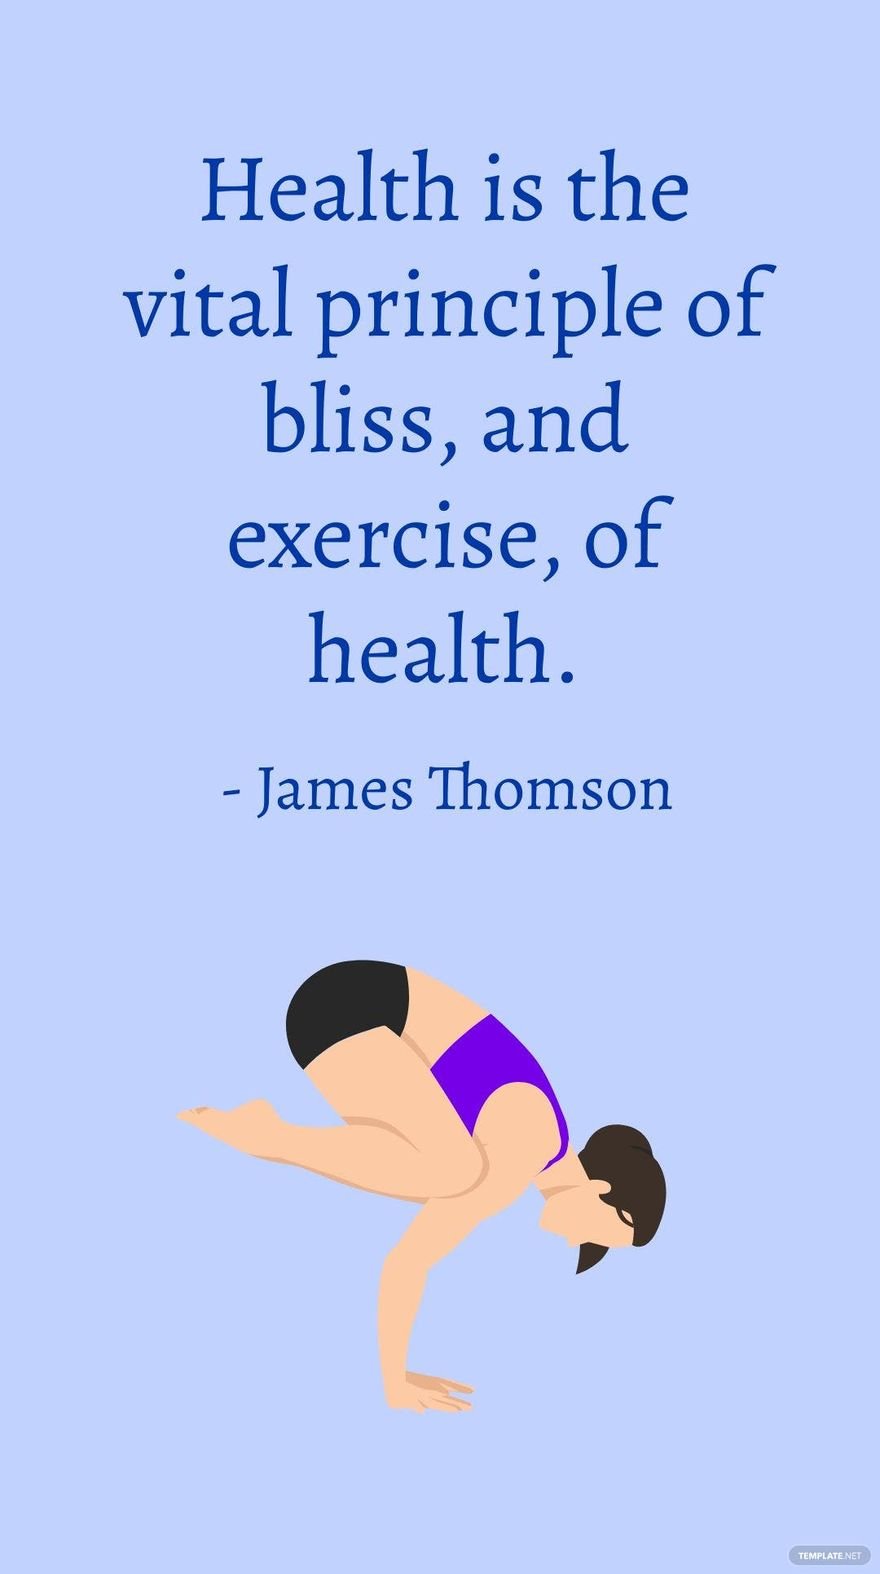 Free James Thomson - Health is the vital principle of bliss, and exercise, of health. - James Thomson in JPG